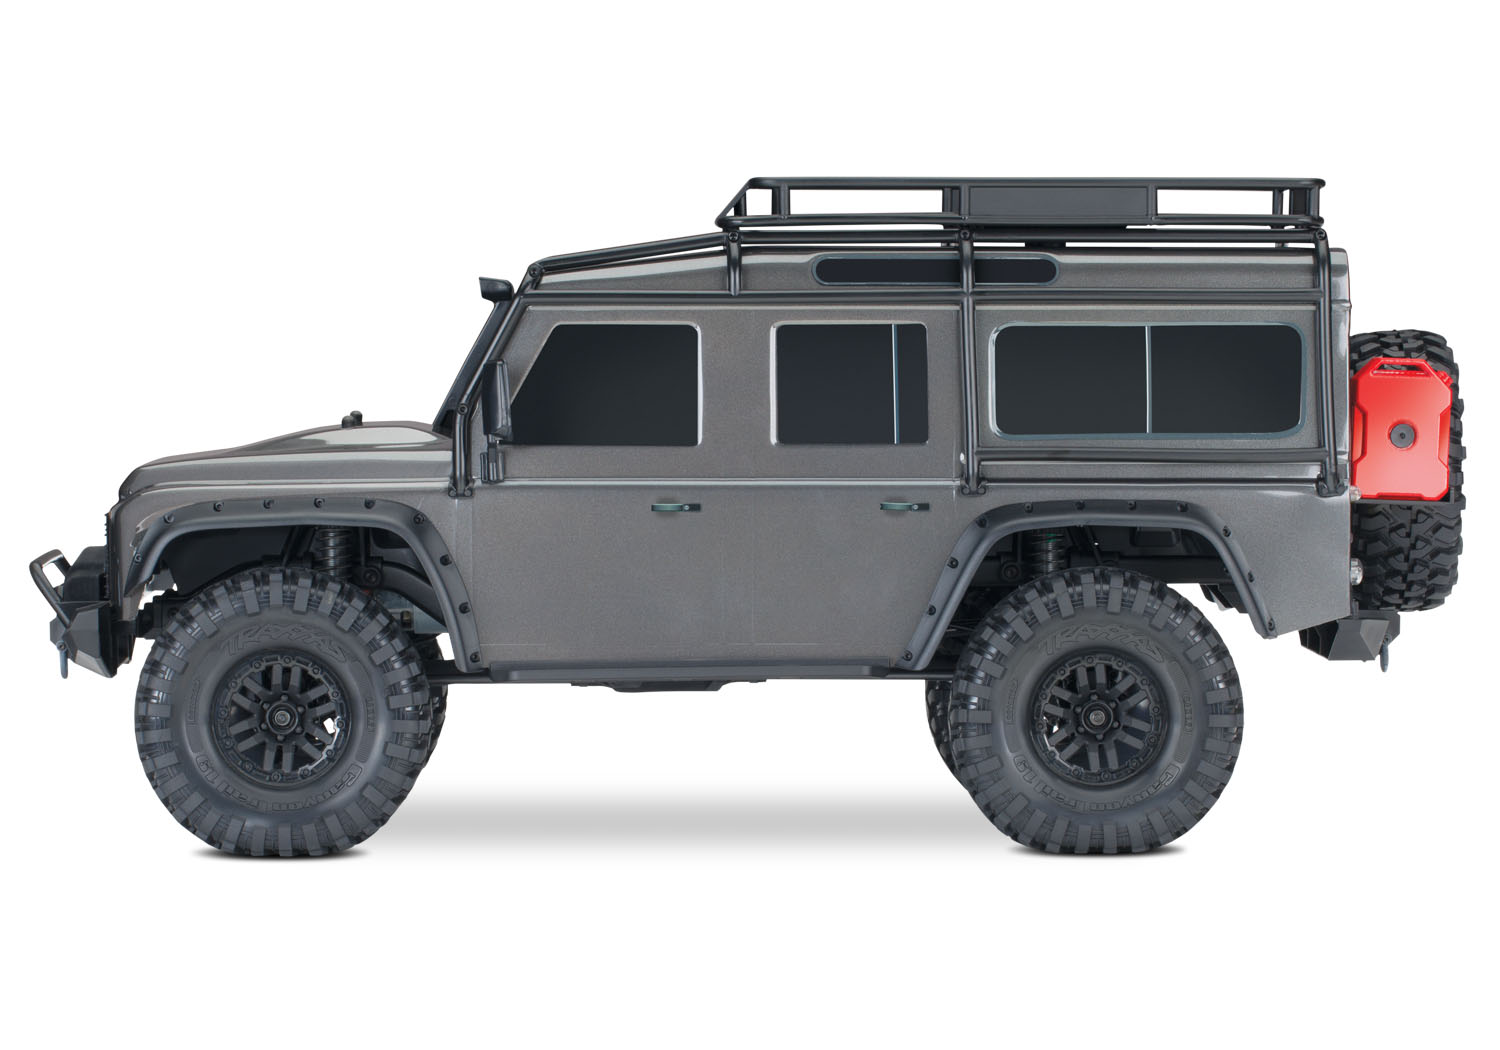 TRX-4 Scale & Trail Crawler Land Rover Defender Silber RTR